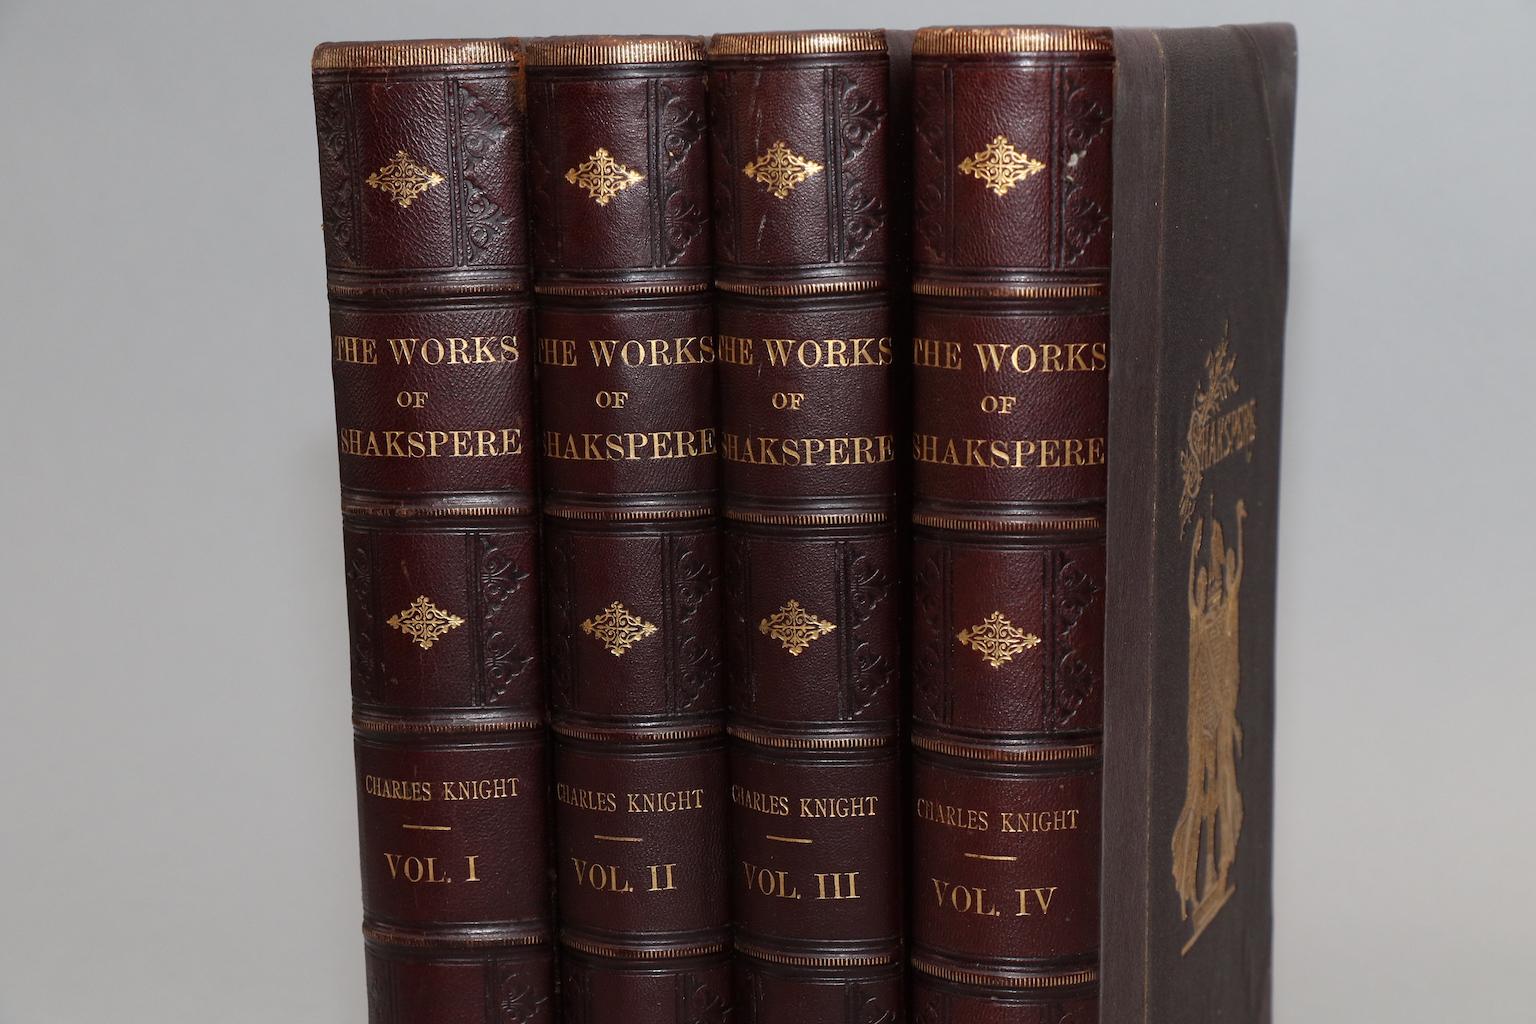 Imperial Edition

Four volumes. Octavo. Bound in three-quarter brown morocco with raised bands, all edges gilt, and gilt on spines and front covers. Profusely illustrated with steel engravings.

Published Virtue & Co., London, 1880s.